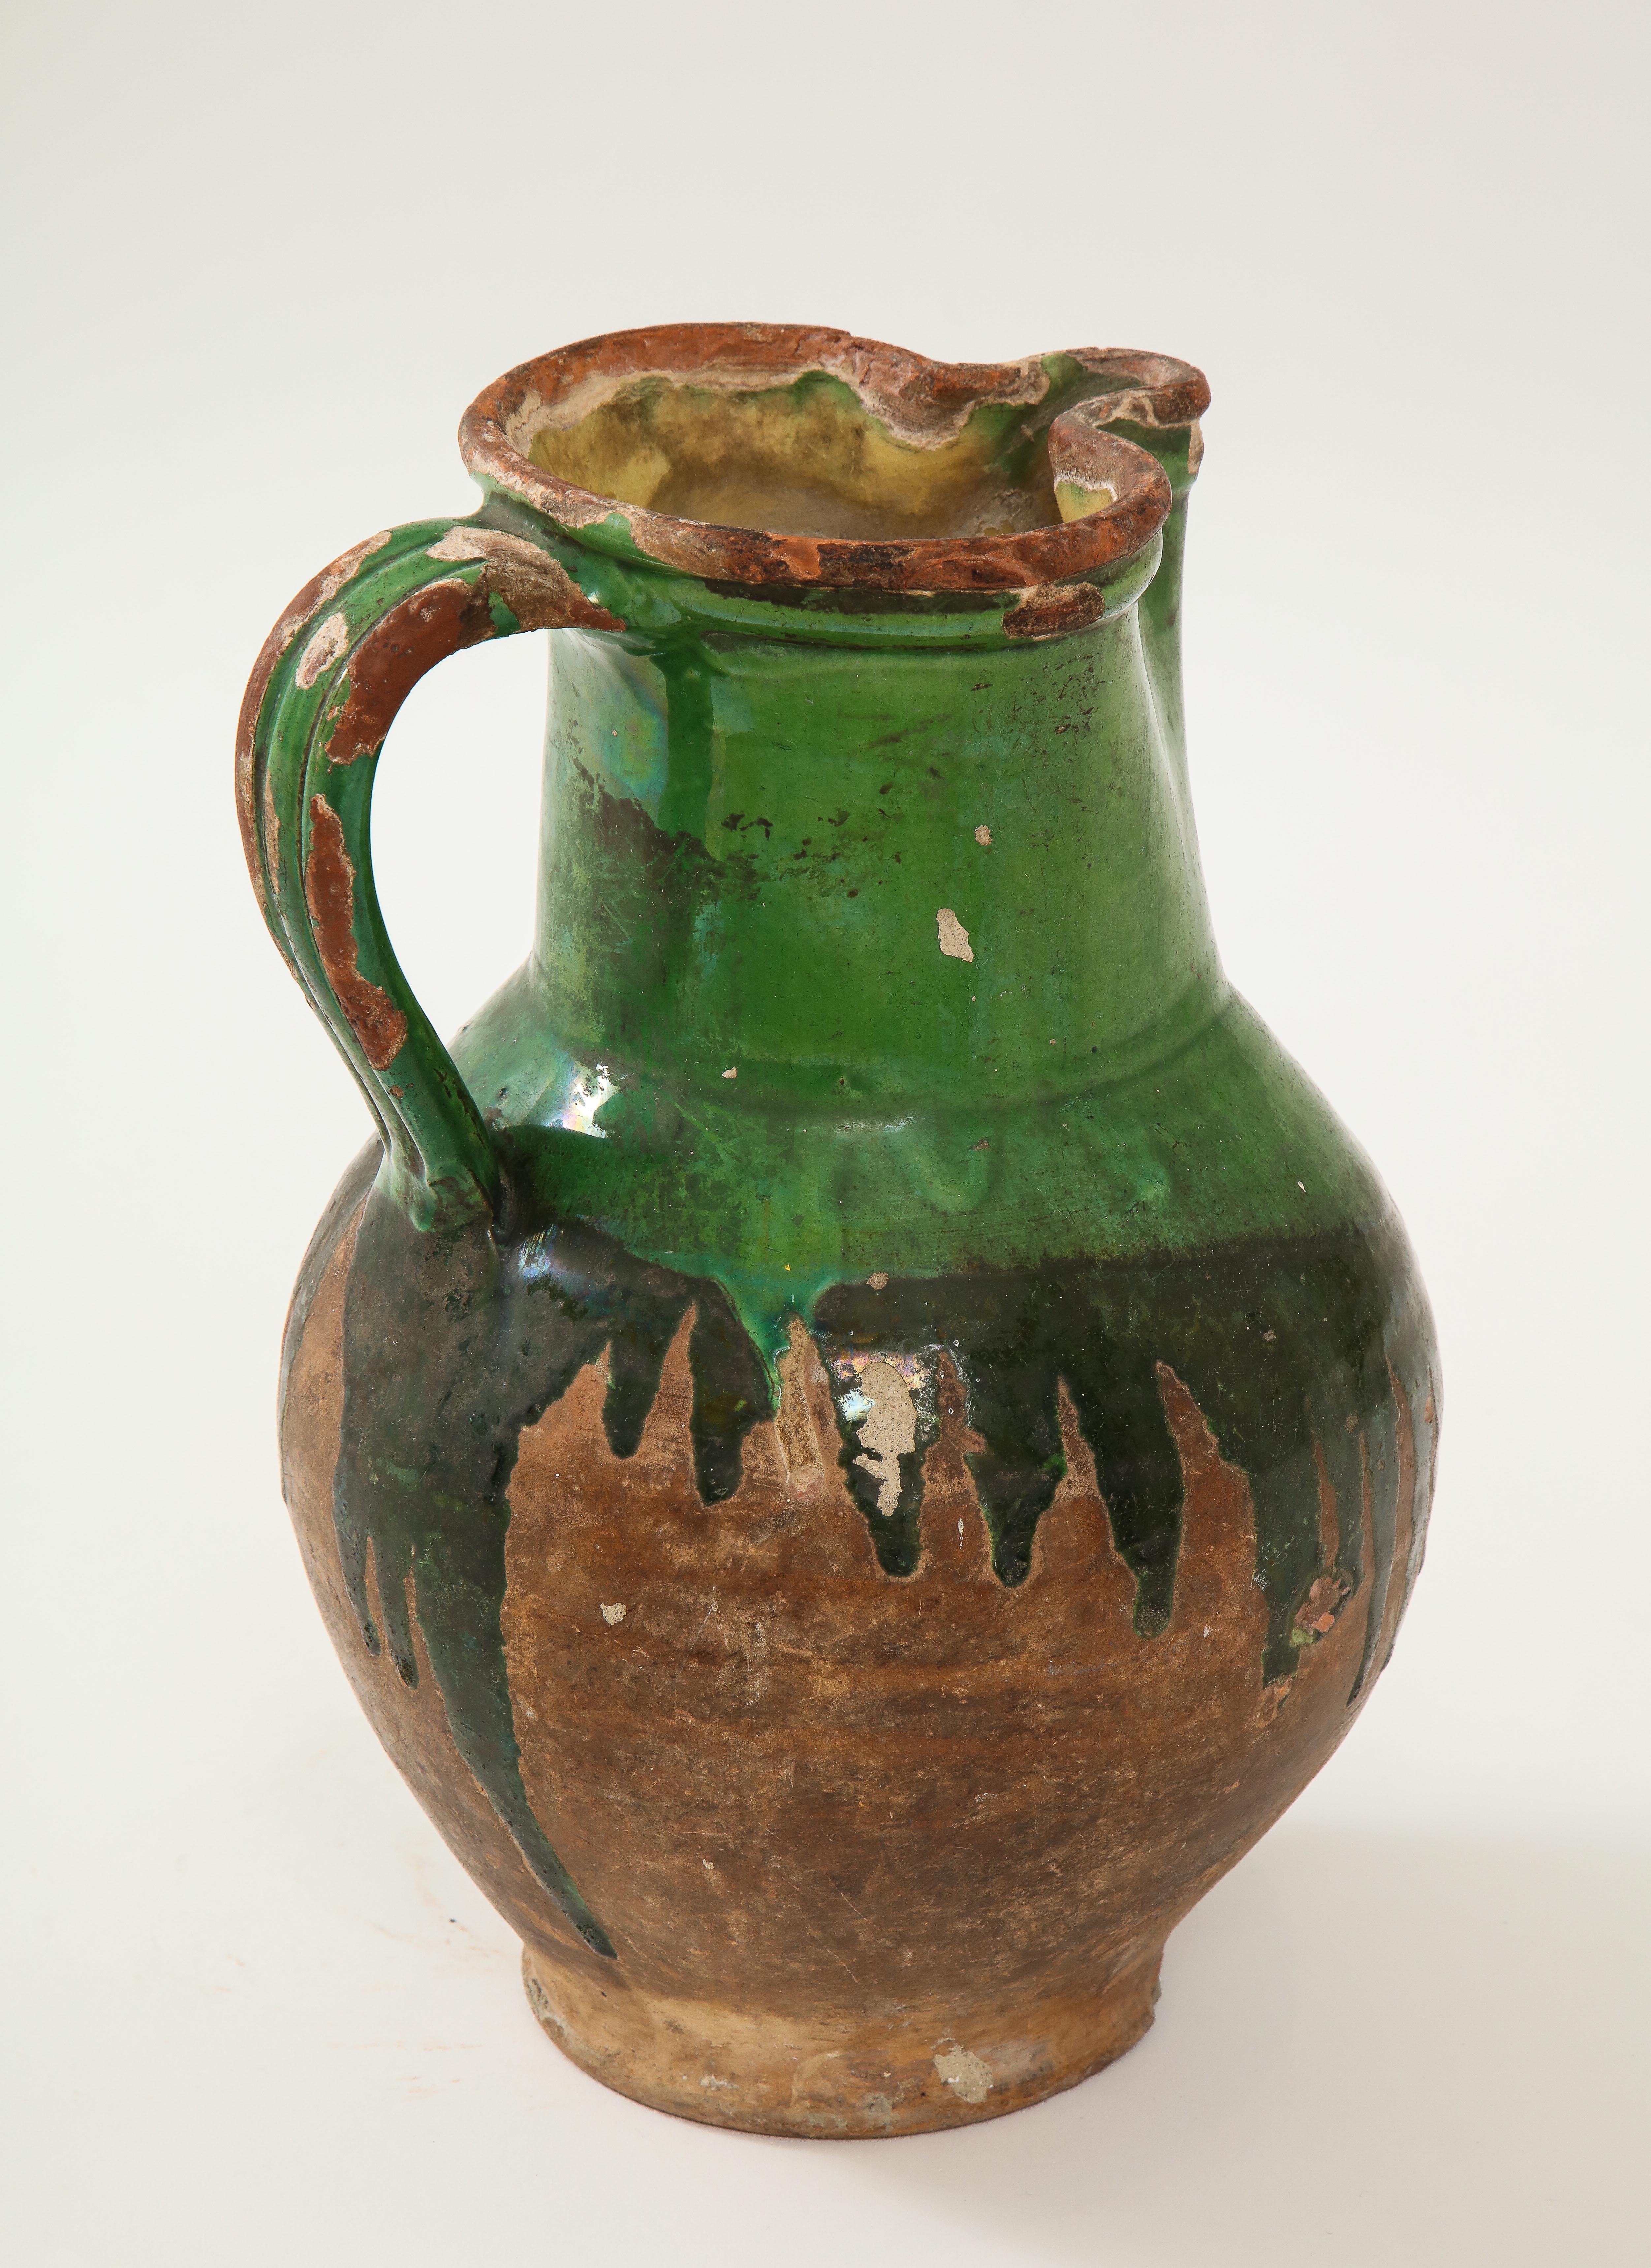 This is a very rare large pitcher from Friesland from the 17th century. The yellow interior glaze with the careless outer green glaze is typical of this period and is traditional Fresian. The Dutch were making this type of earthenware as early as